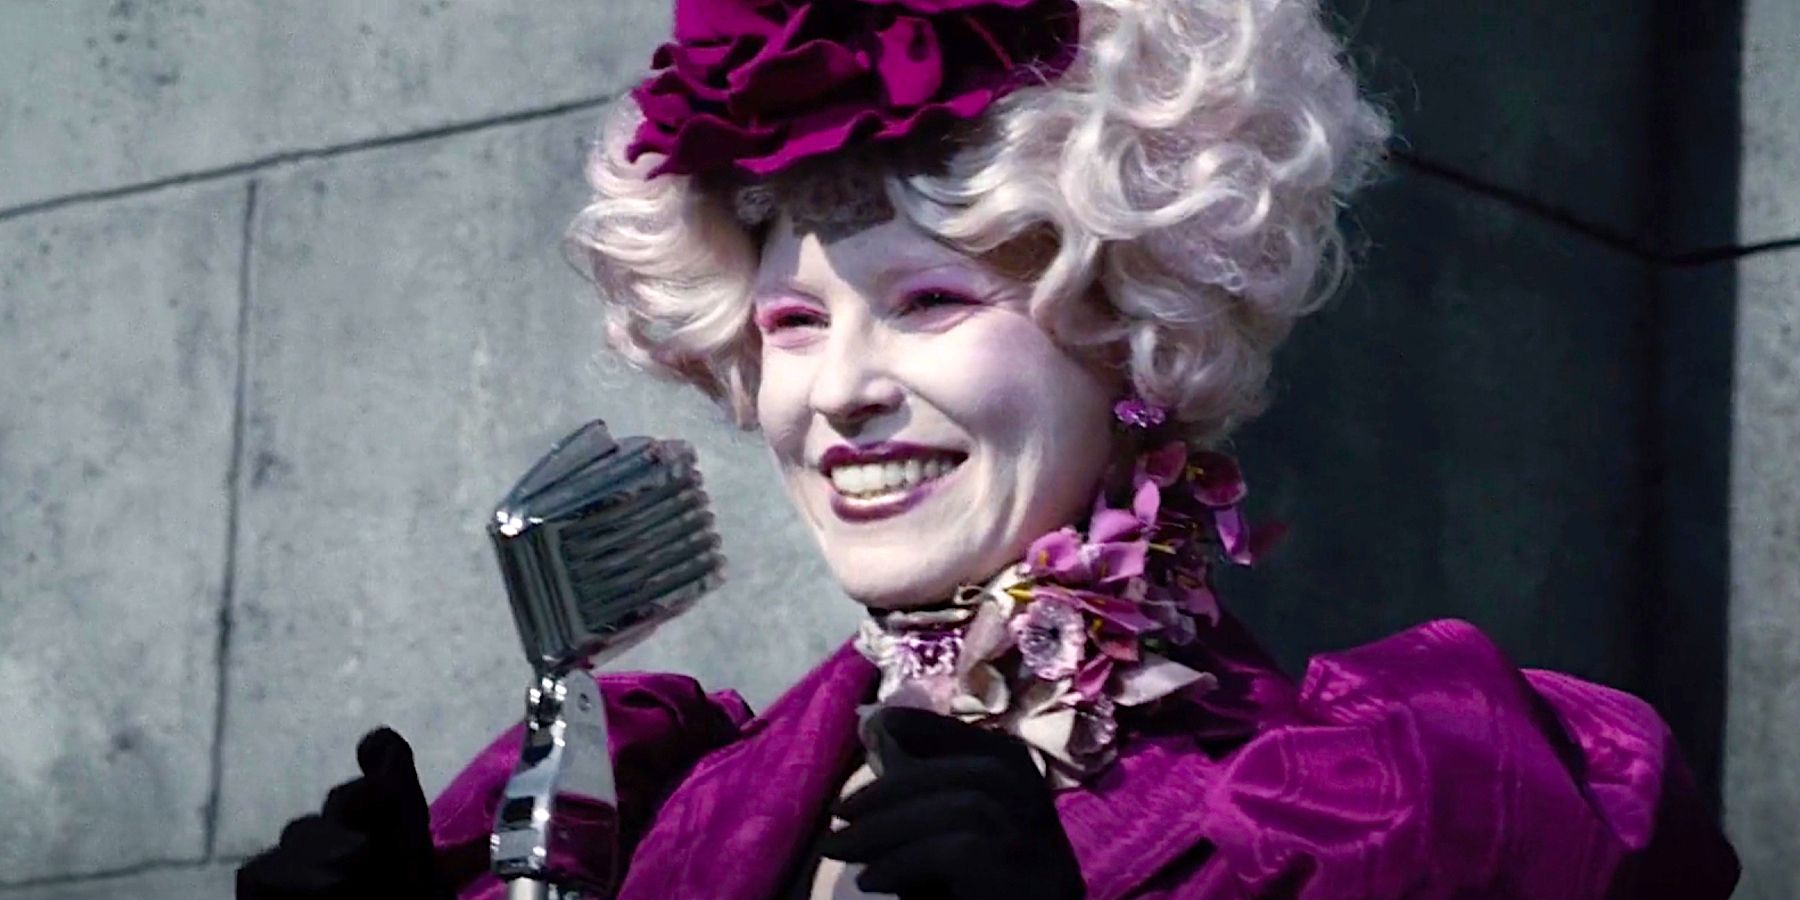 Effie giving a speech in The Hunger Games